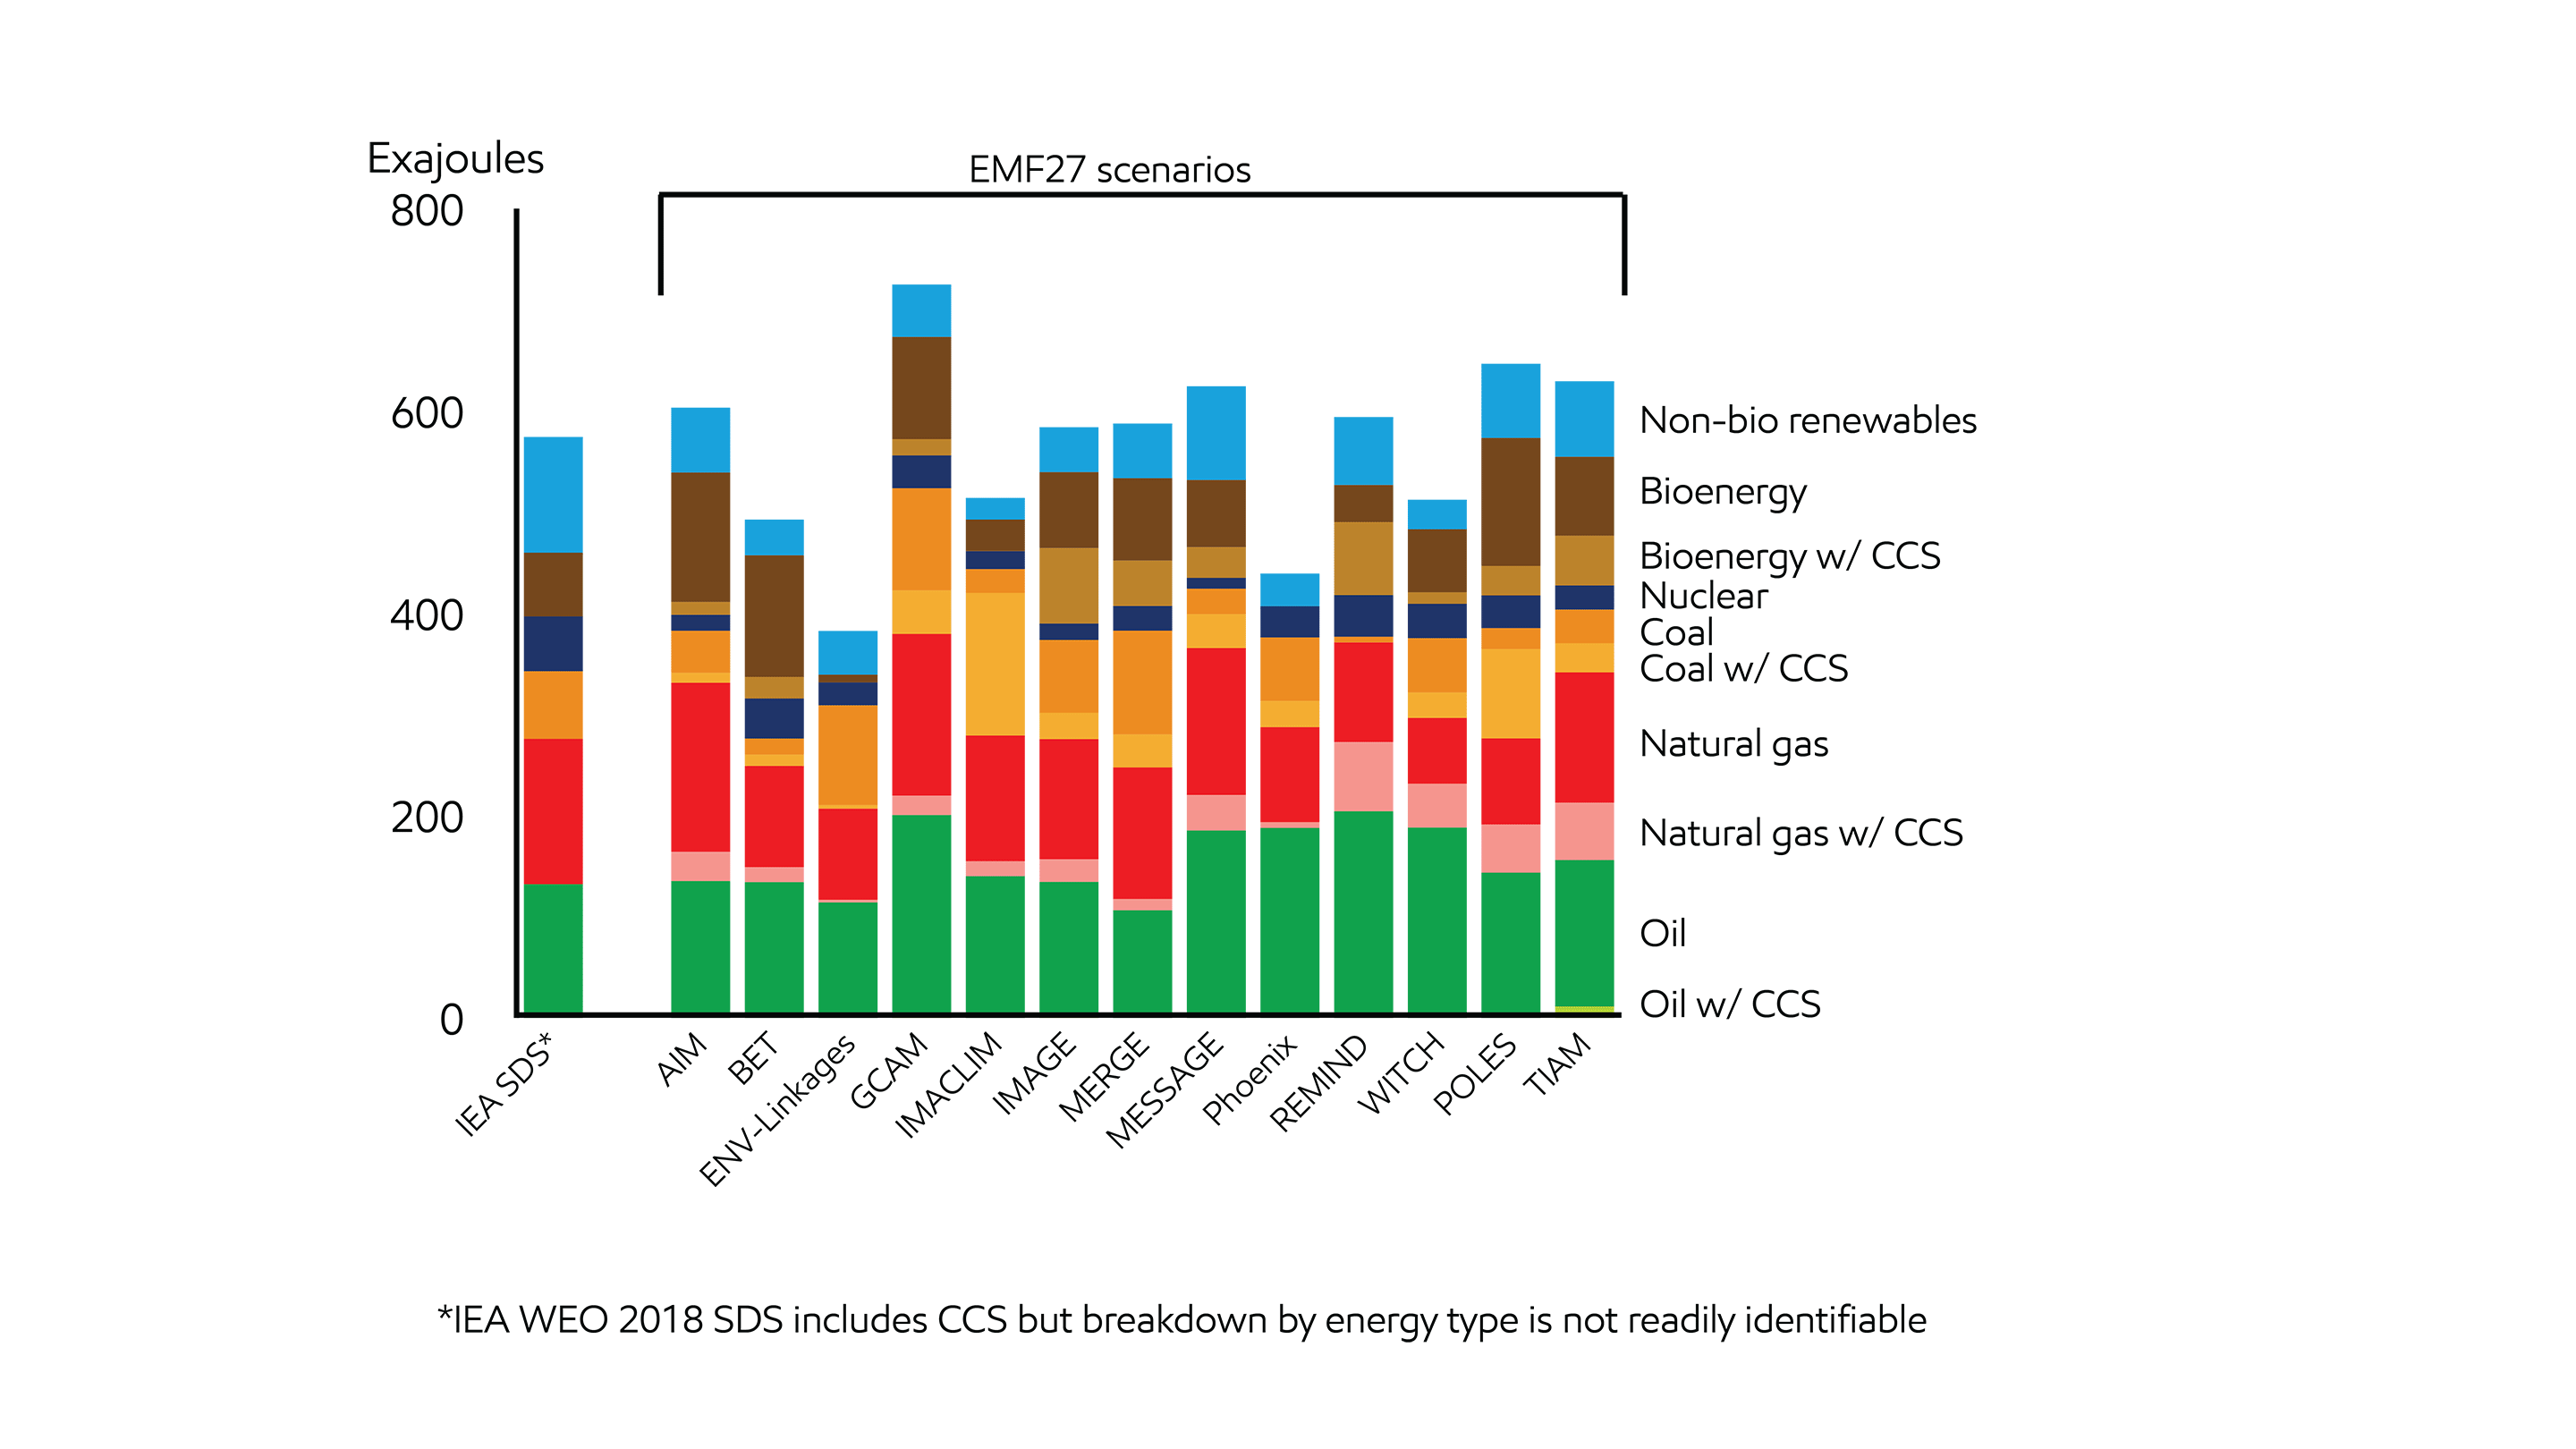 Image 2040 global demand by model by energy type in the assessed 2oC
scenarios and the IEA SDS